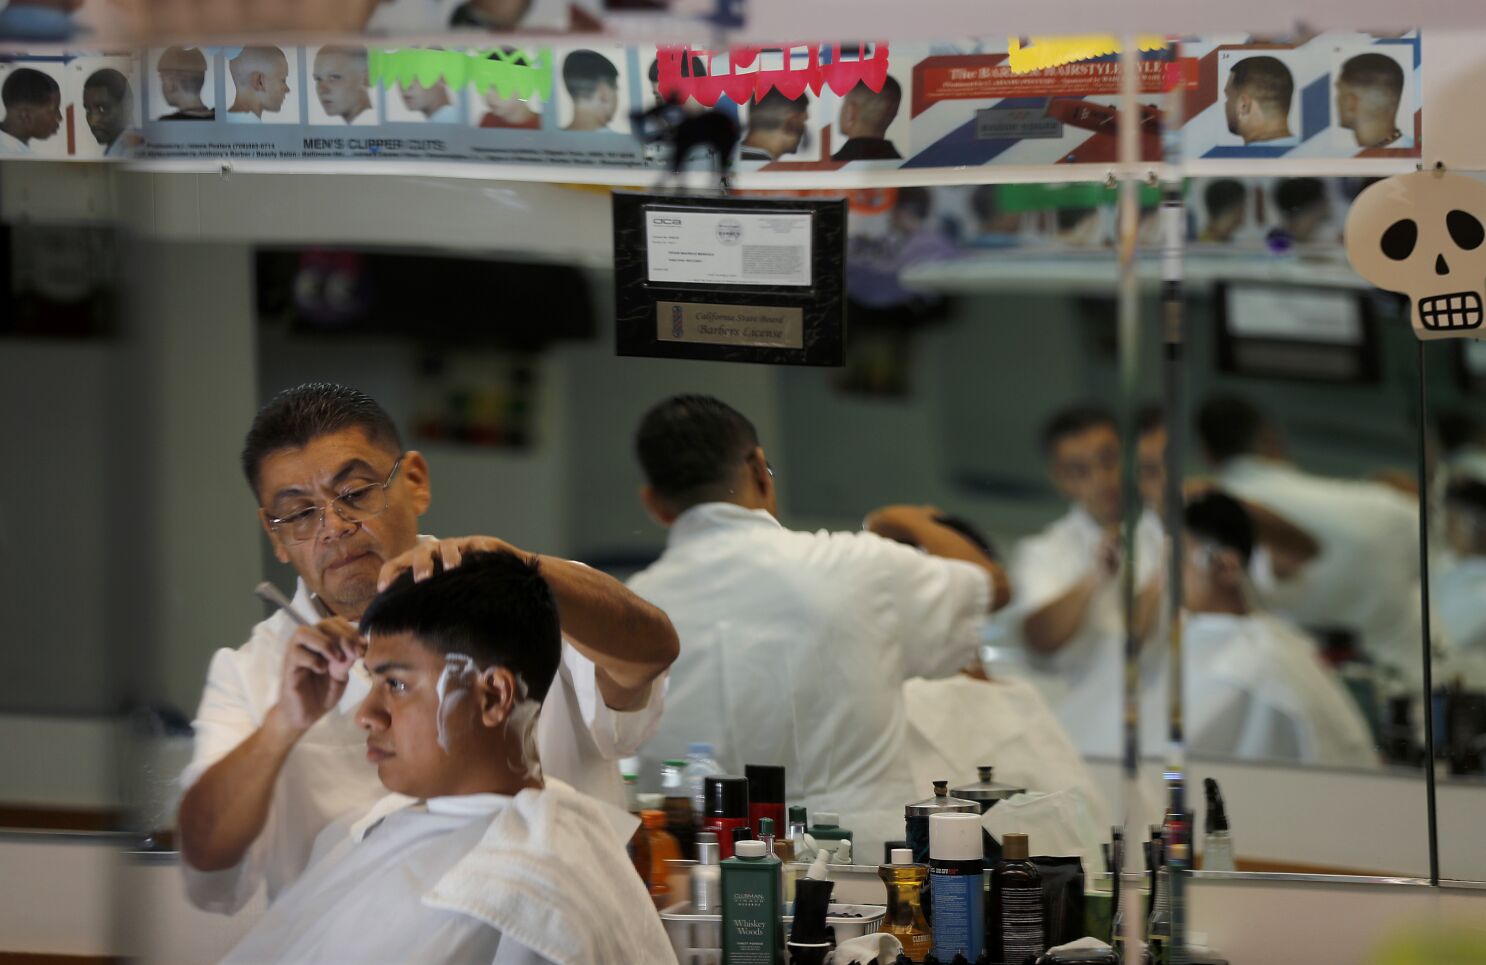 Asian hair, and what we talk about in . barbershops - Los Angeles Times